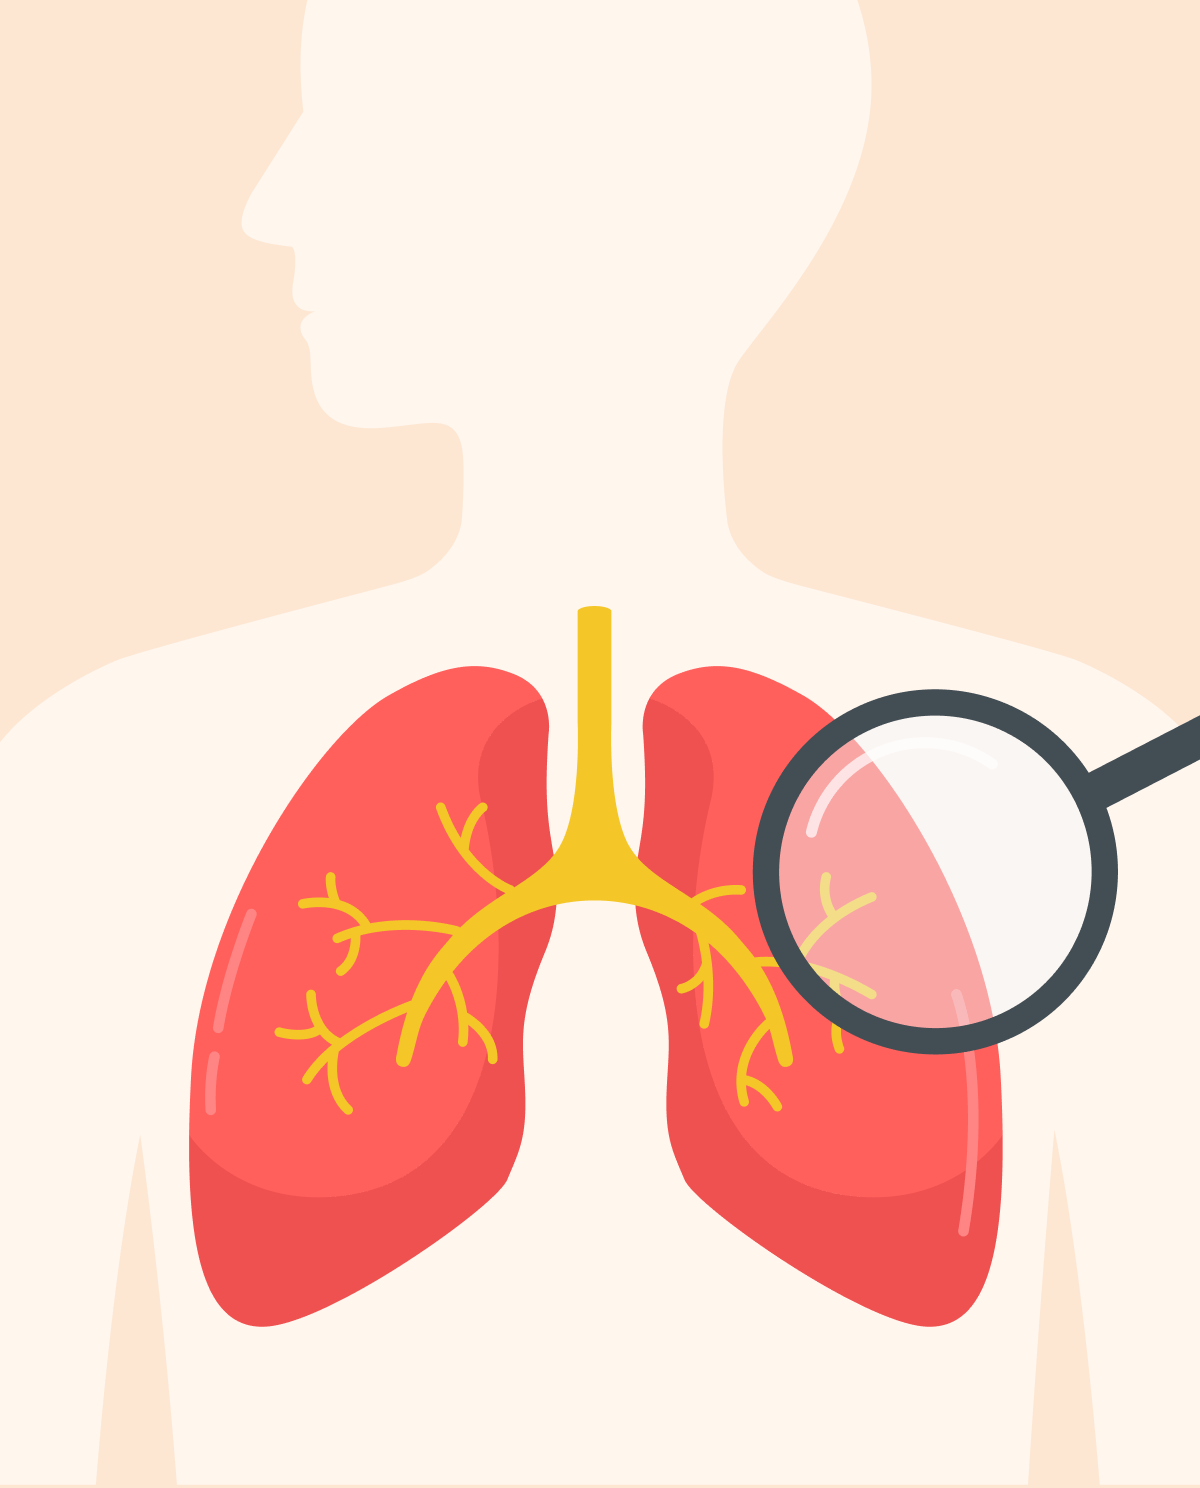 Restrictive pulmonary disease overview